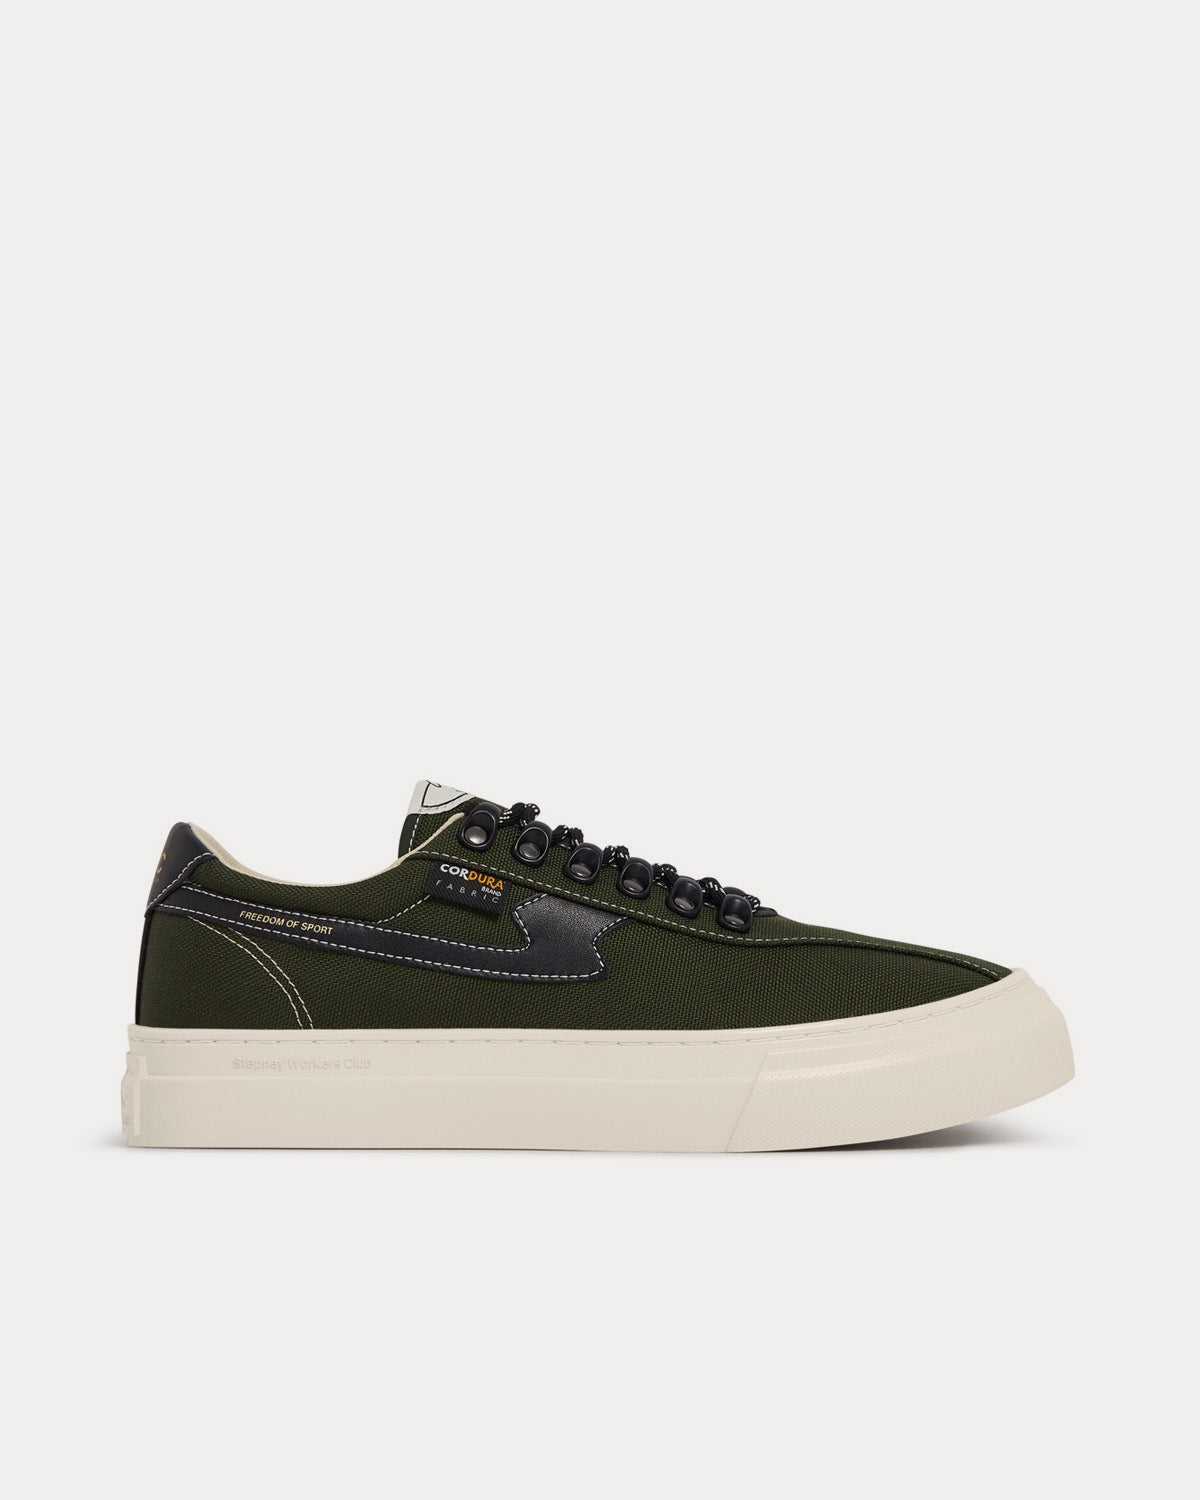 Stepney Workers Club - Dellow S-Strike Cup Cordura Military / Black Low Top Sneakers